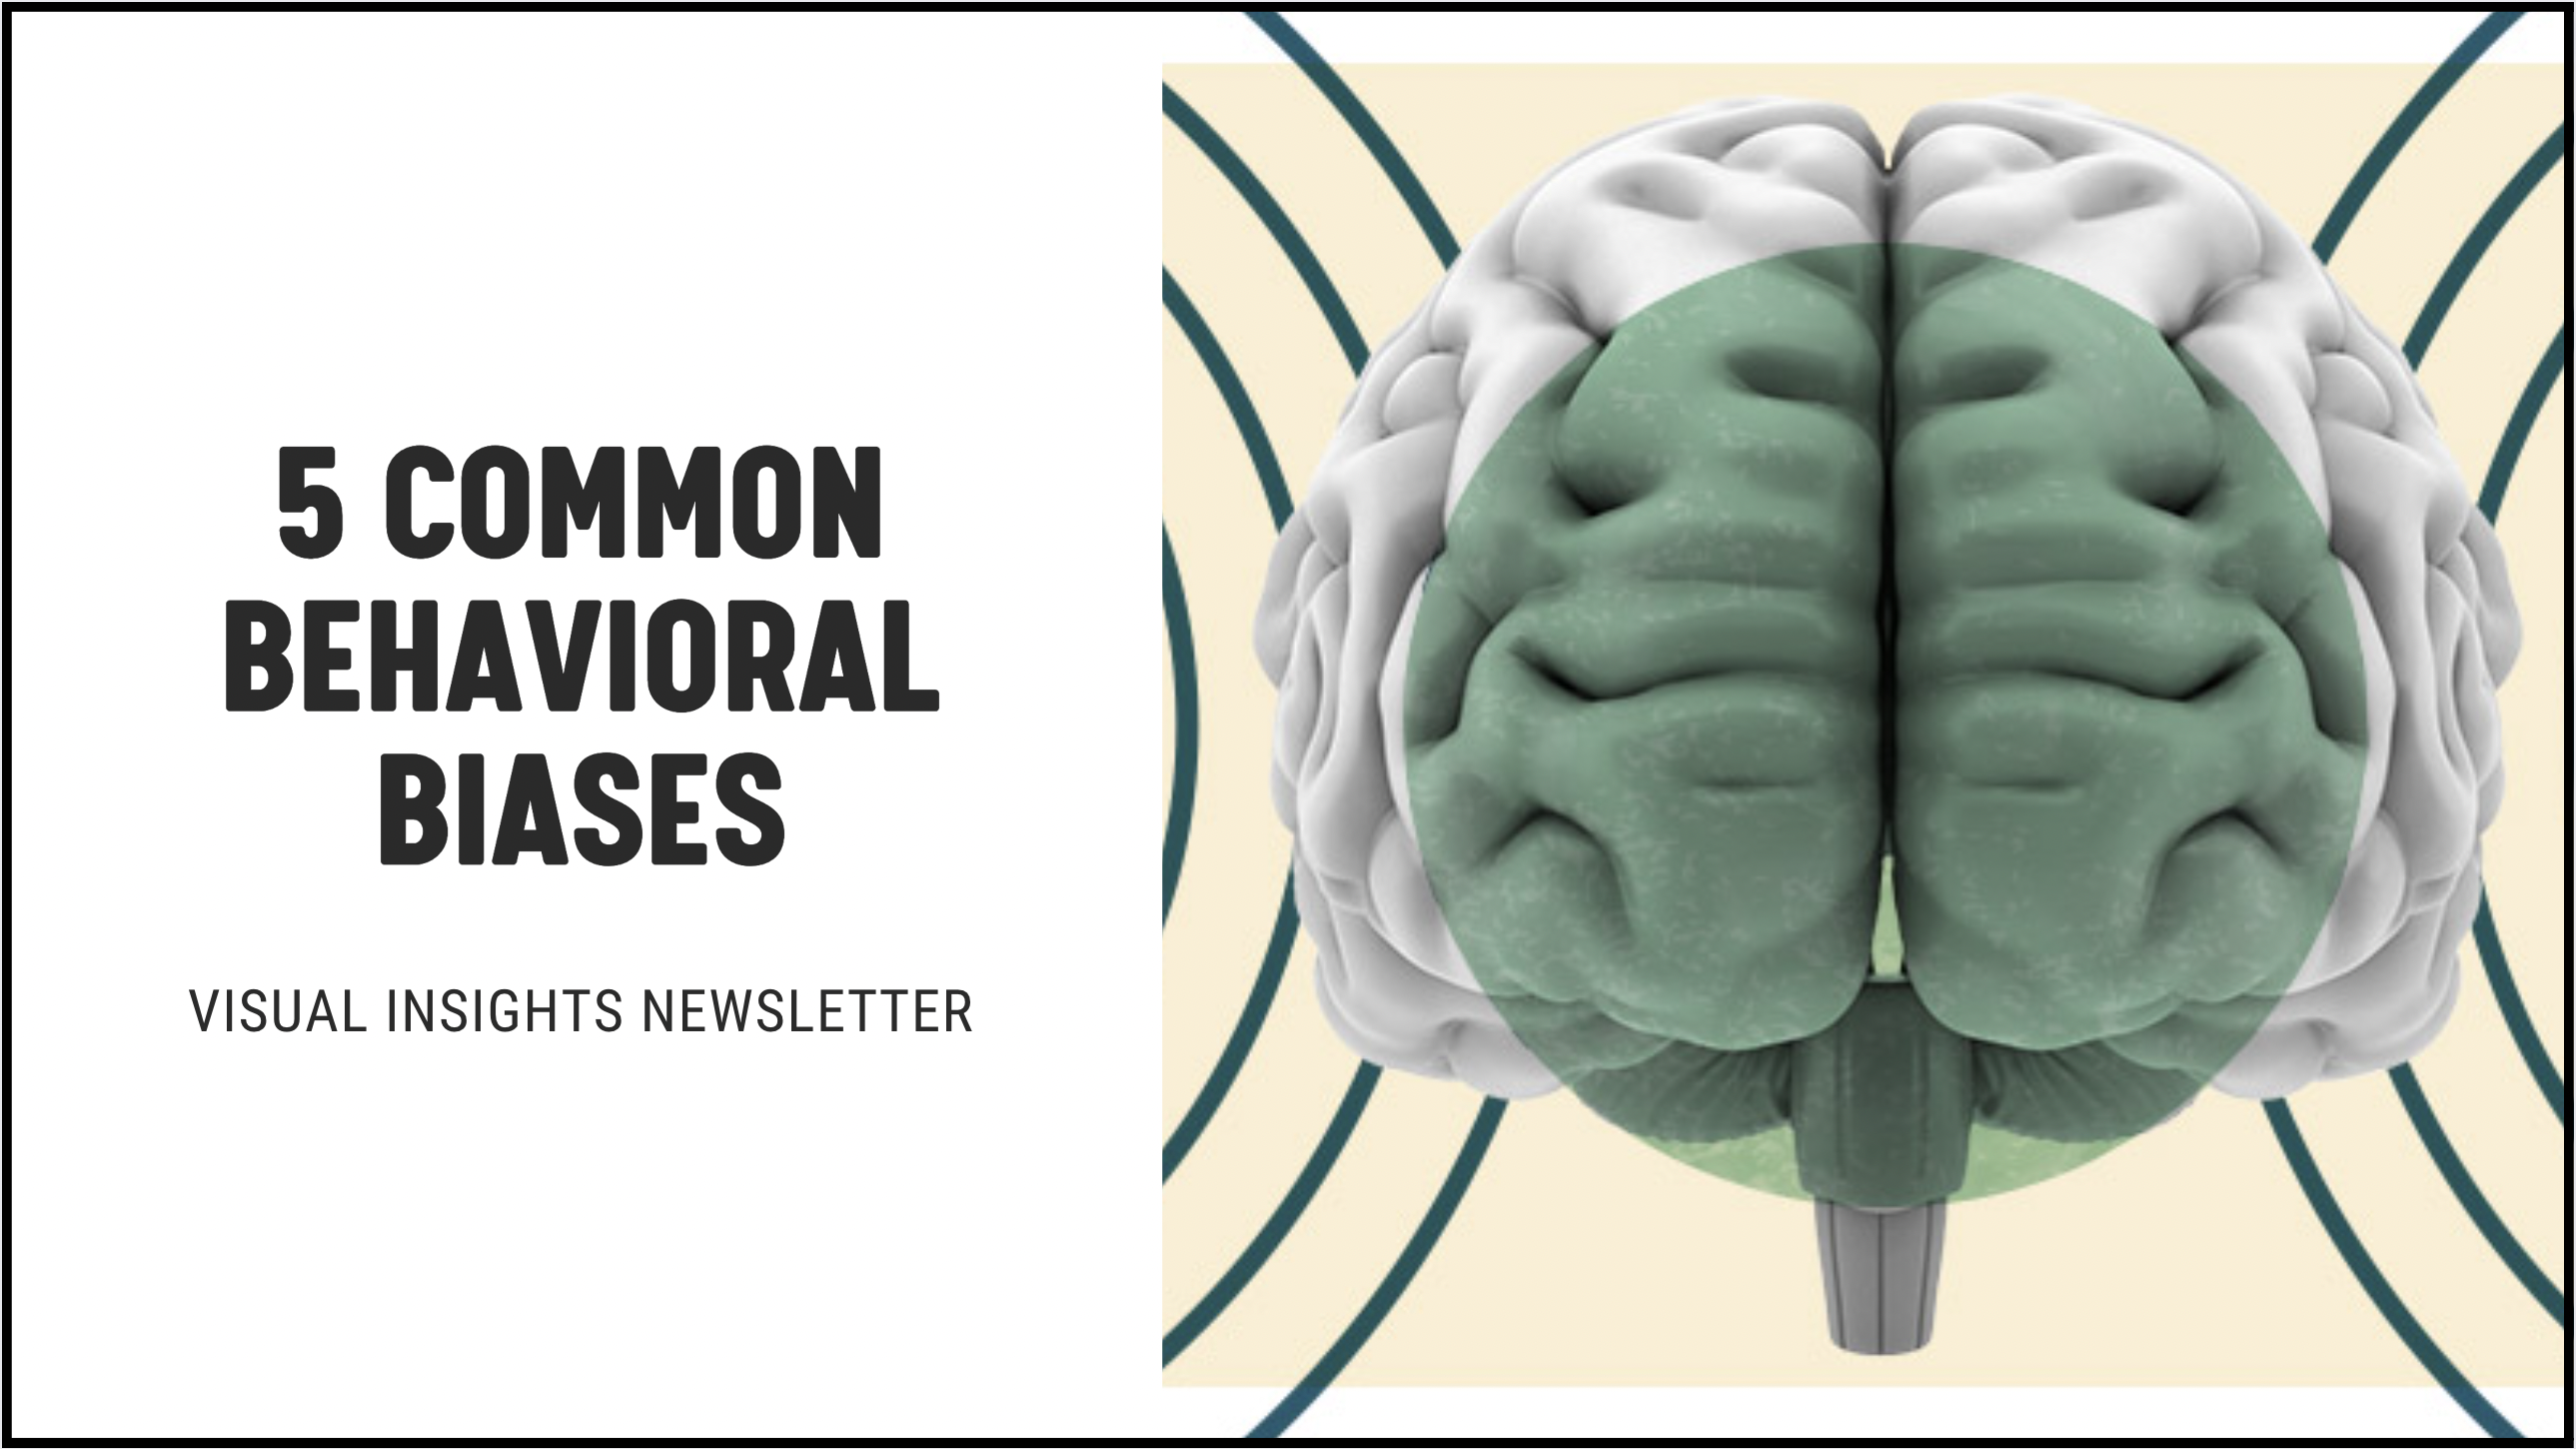 [NEW] 5 Common Behavioral Biases - Visual Insights Newsletter Marketing Campaigns For Financial Advisors